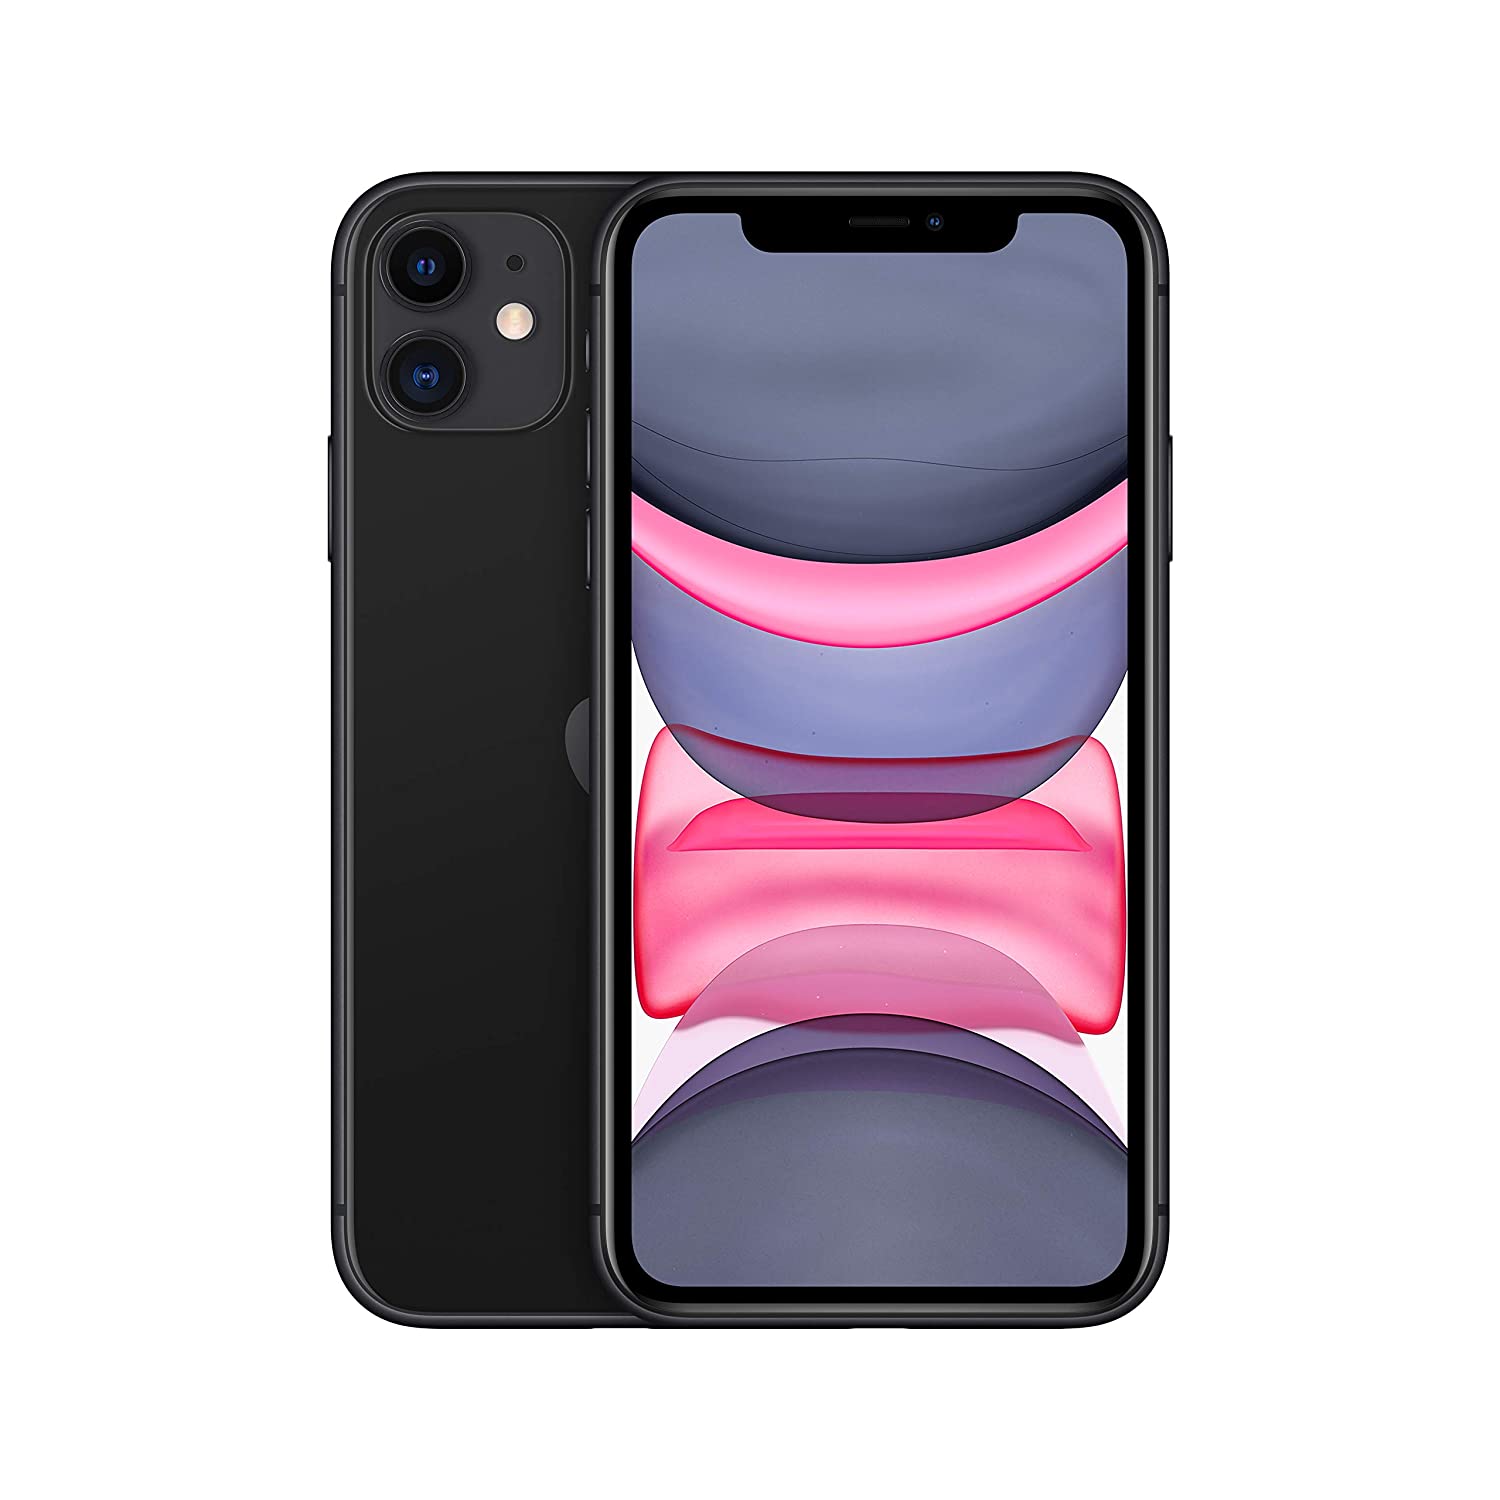 Amazon Navratri Sale If you want to buy iPhone, then don't miss Amazon's Navratri sale where iPhone 11 is getting full discount of more than 27 thousand rupees.